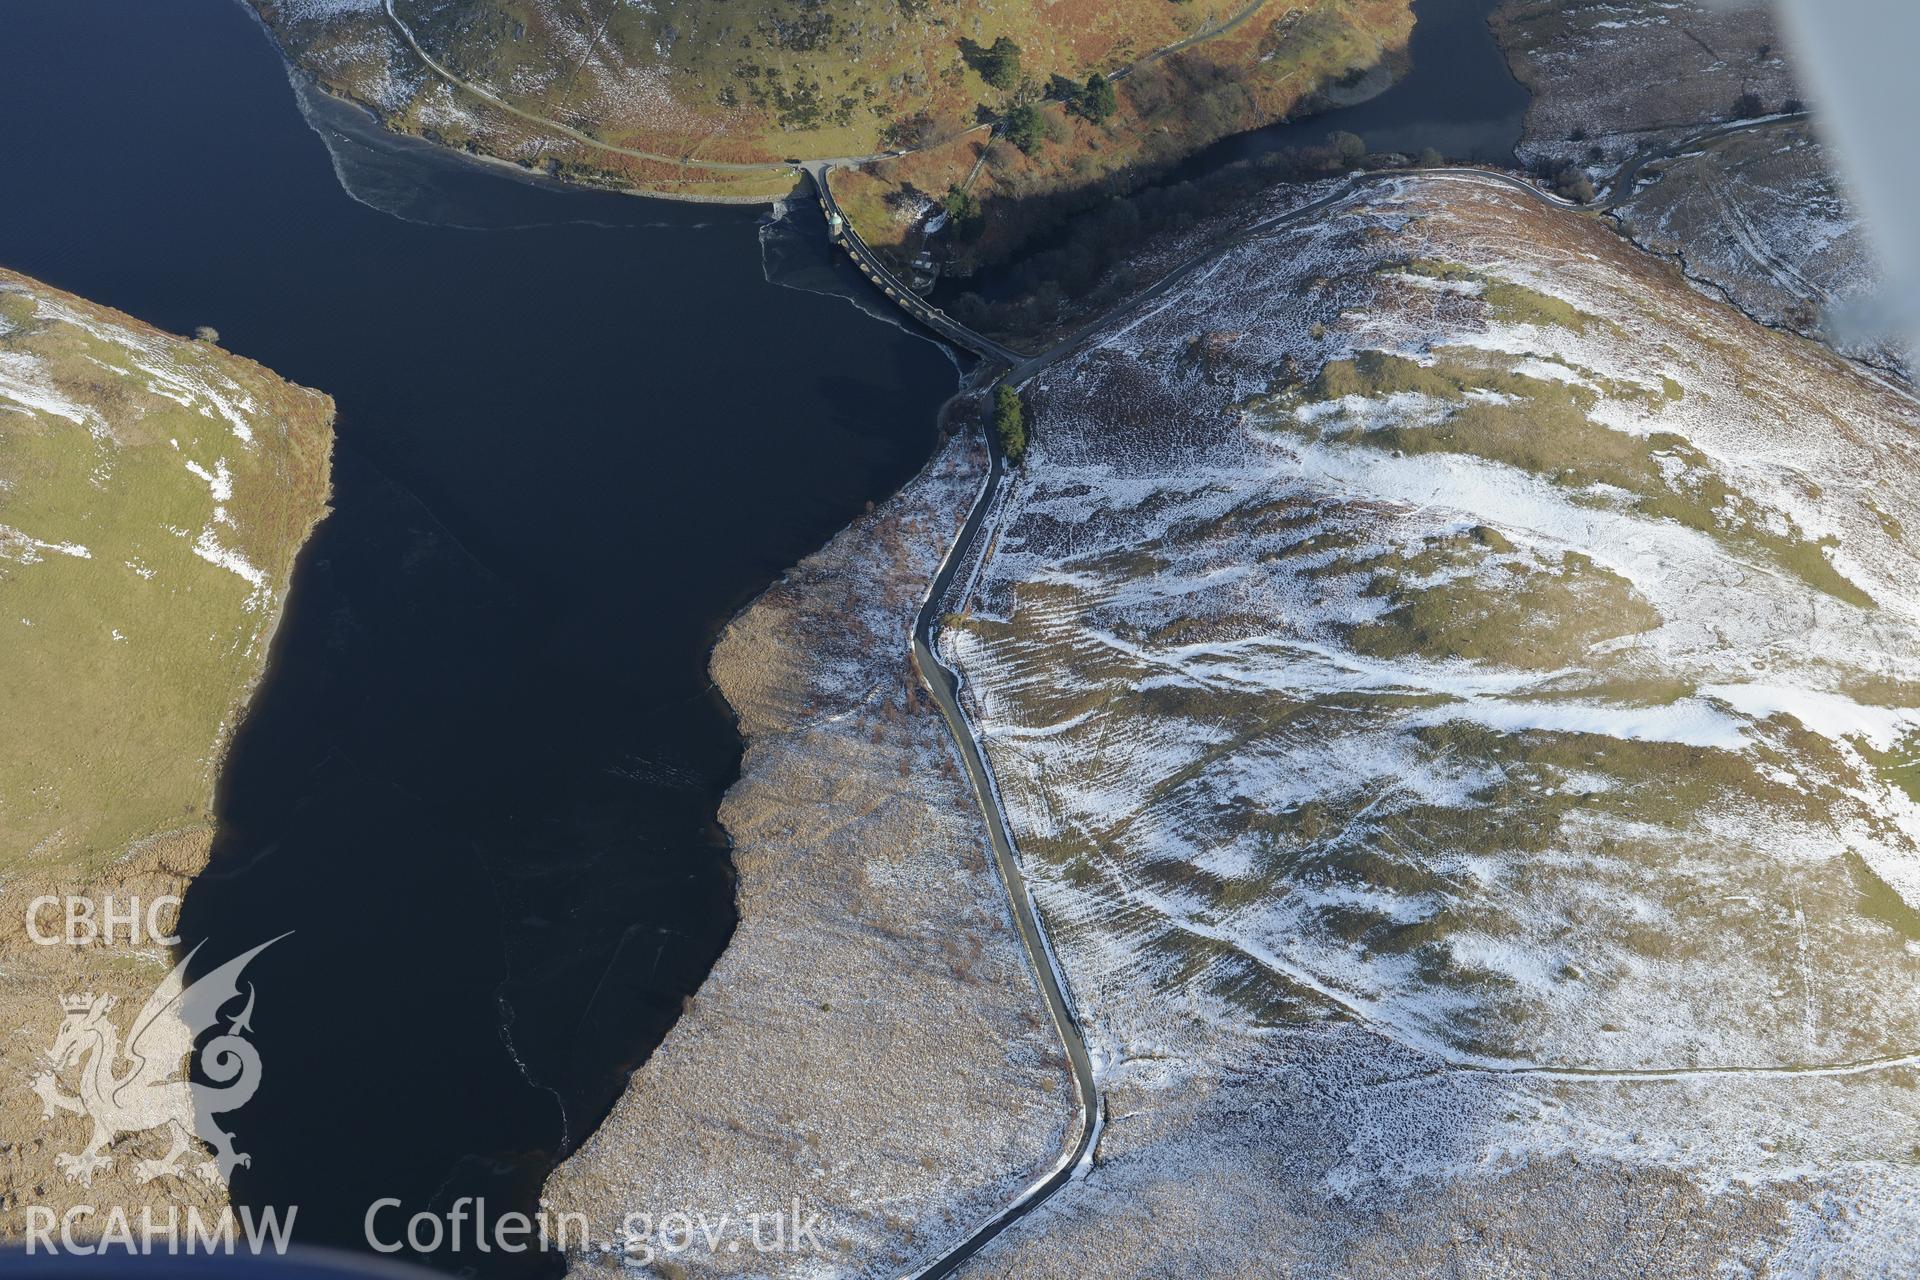 Craig Coch reservoir and dam at the Elan Valley Water Scheme, west of Rhayader. Oblique aerial photograph taken during the Royal Commission's programme of archaeological aerial reconnaissance by Toby Driver on 4th February 2015.